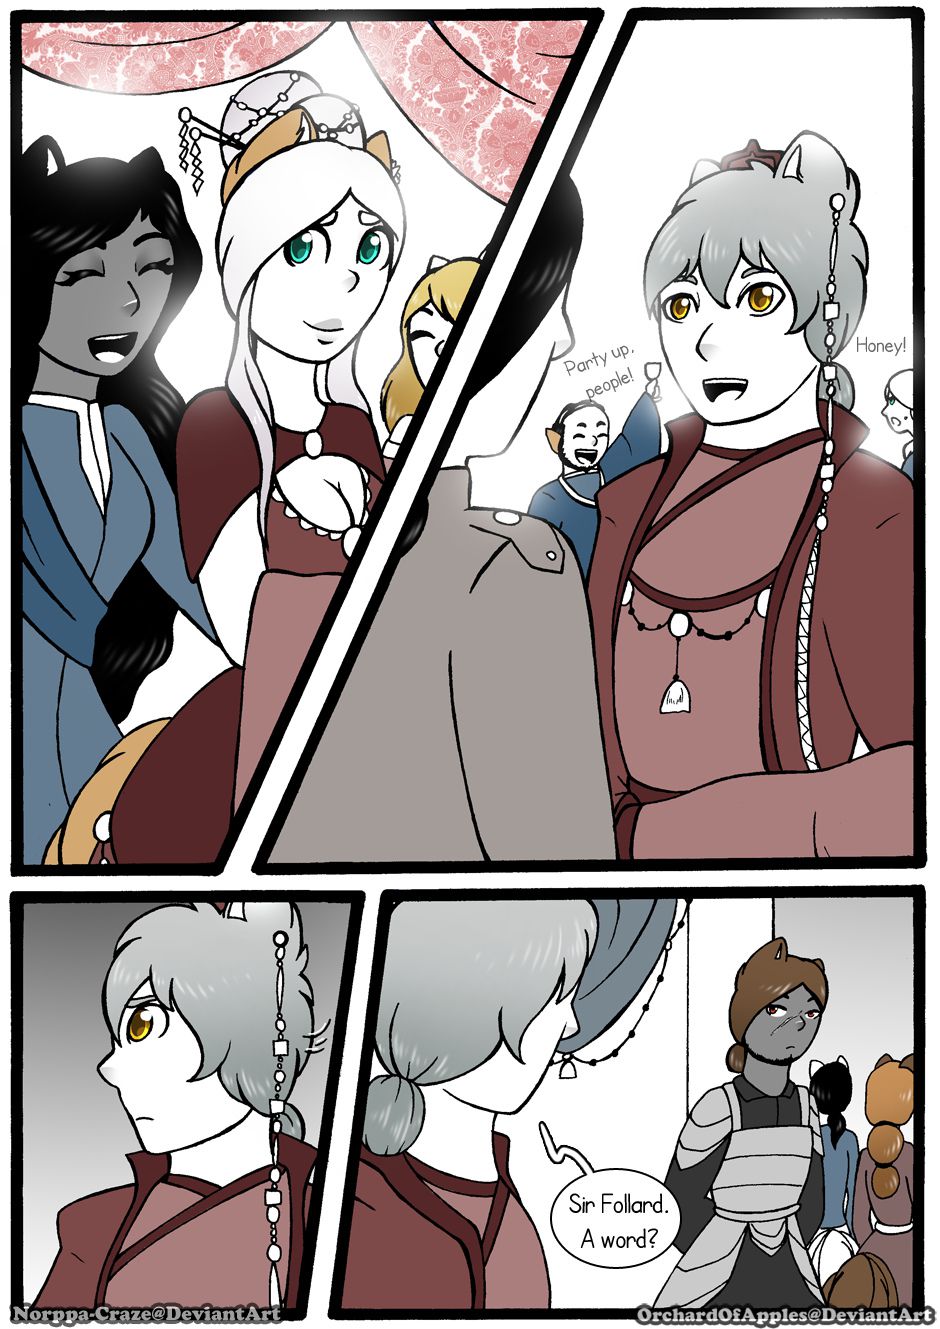 [Jeny-jen94] Between Kings and Queens [Ongoing] 244